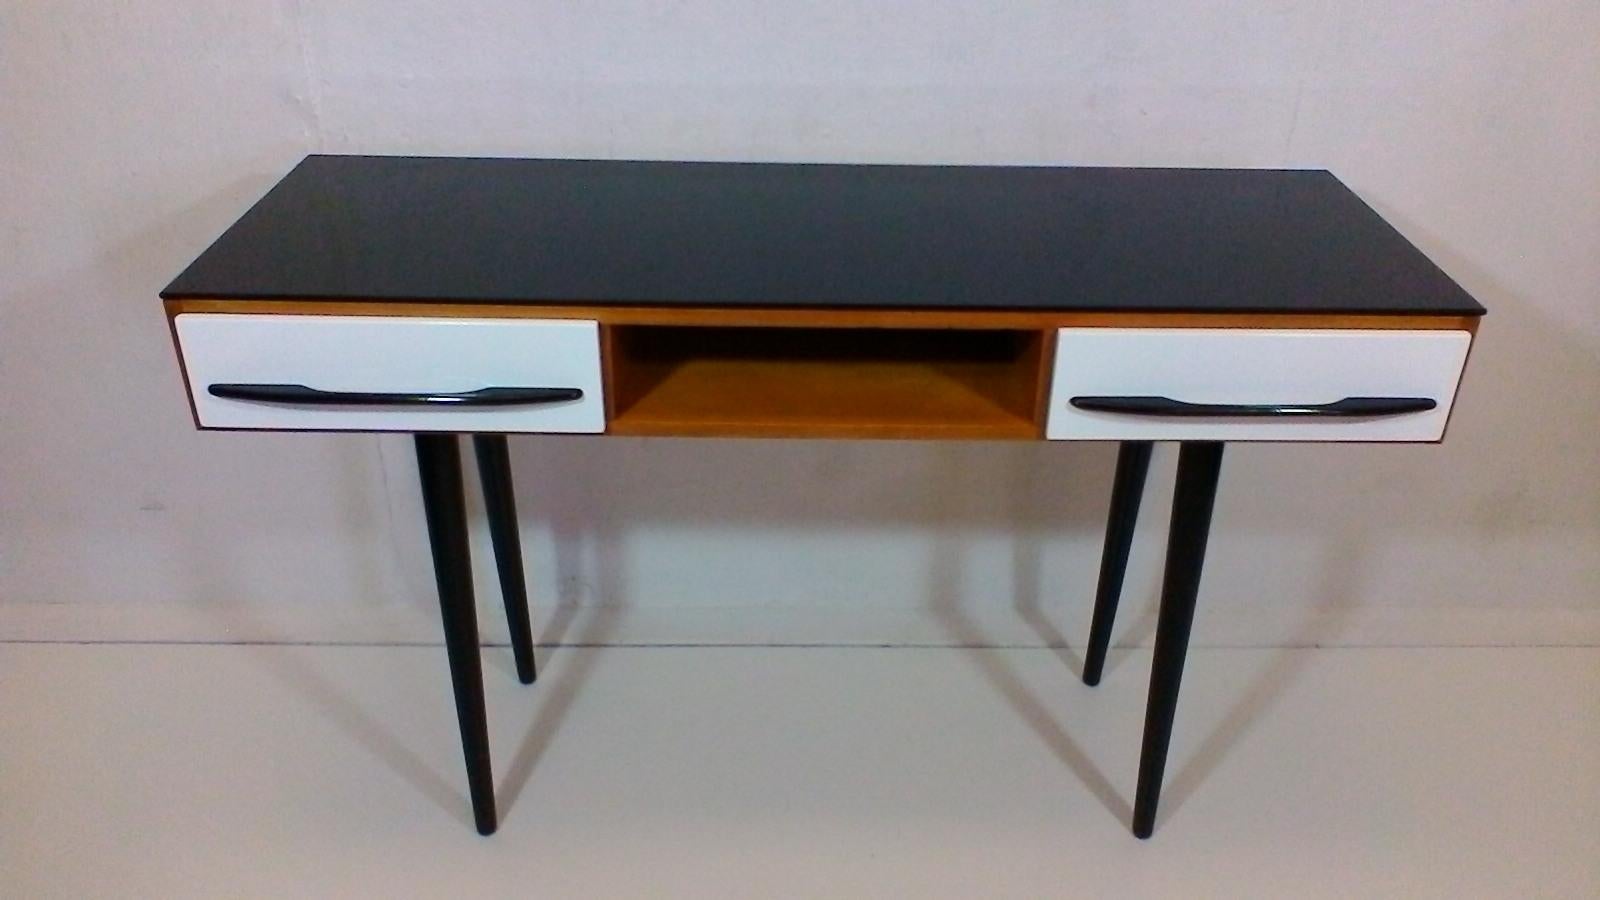 Czechoslovakia. The item is made of veneered and varnished wood, on upper surface is black opax glass, corpus is varnished quality polyurethane varnish. Drawers and legs are varnished into the original colours- black and white in high gloss.